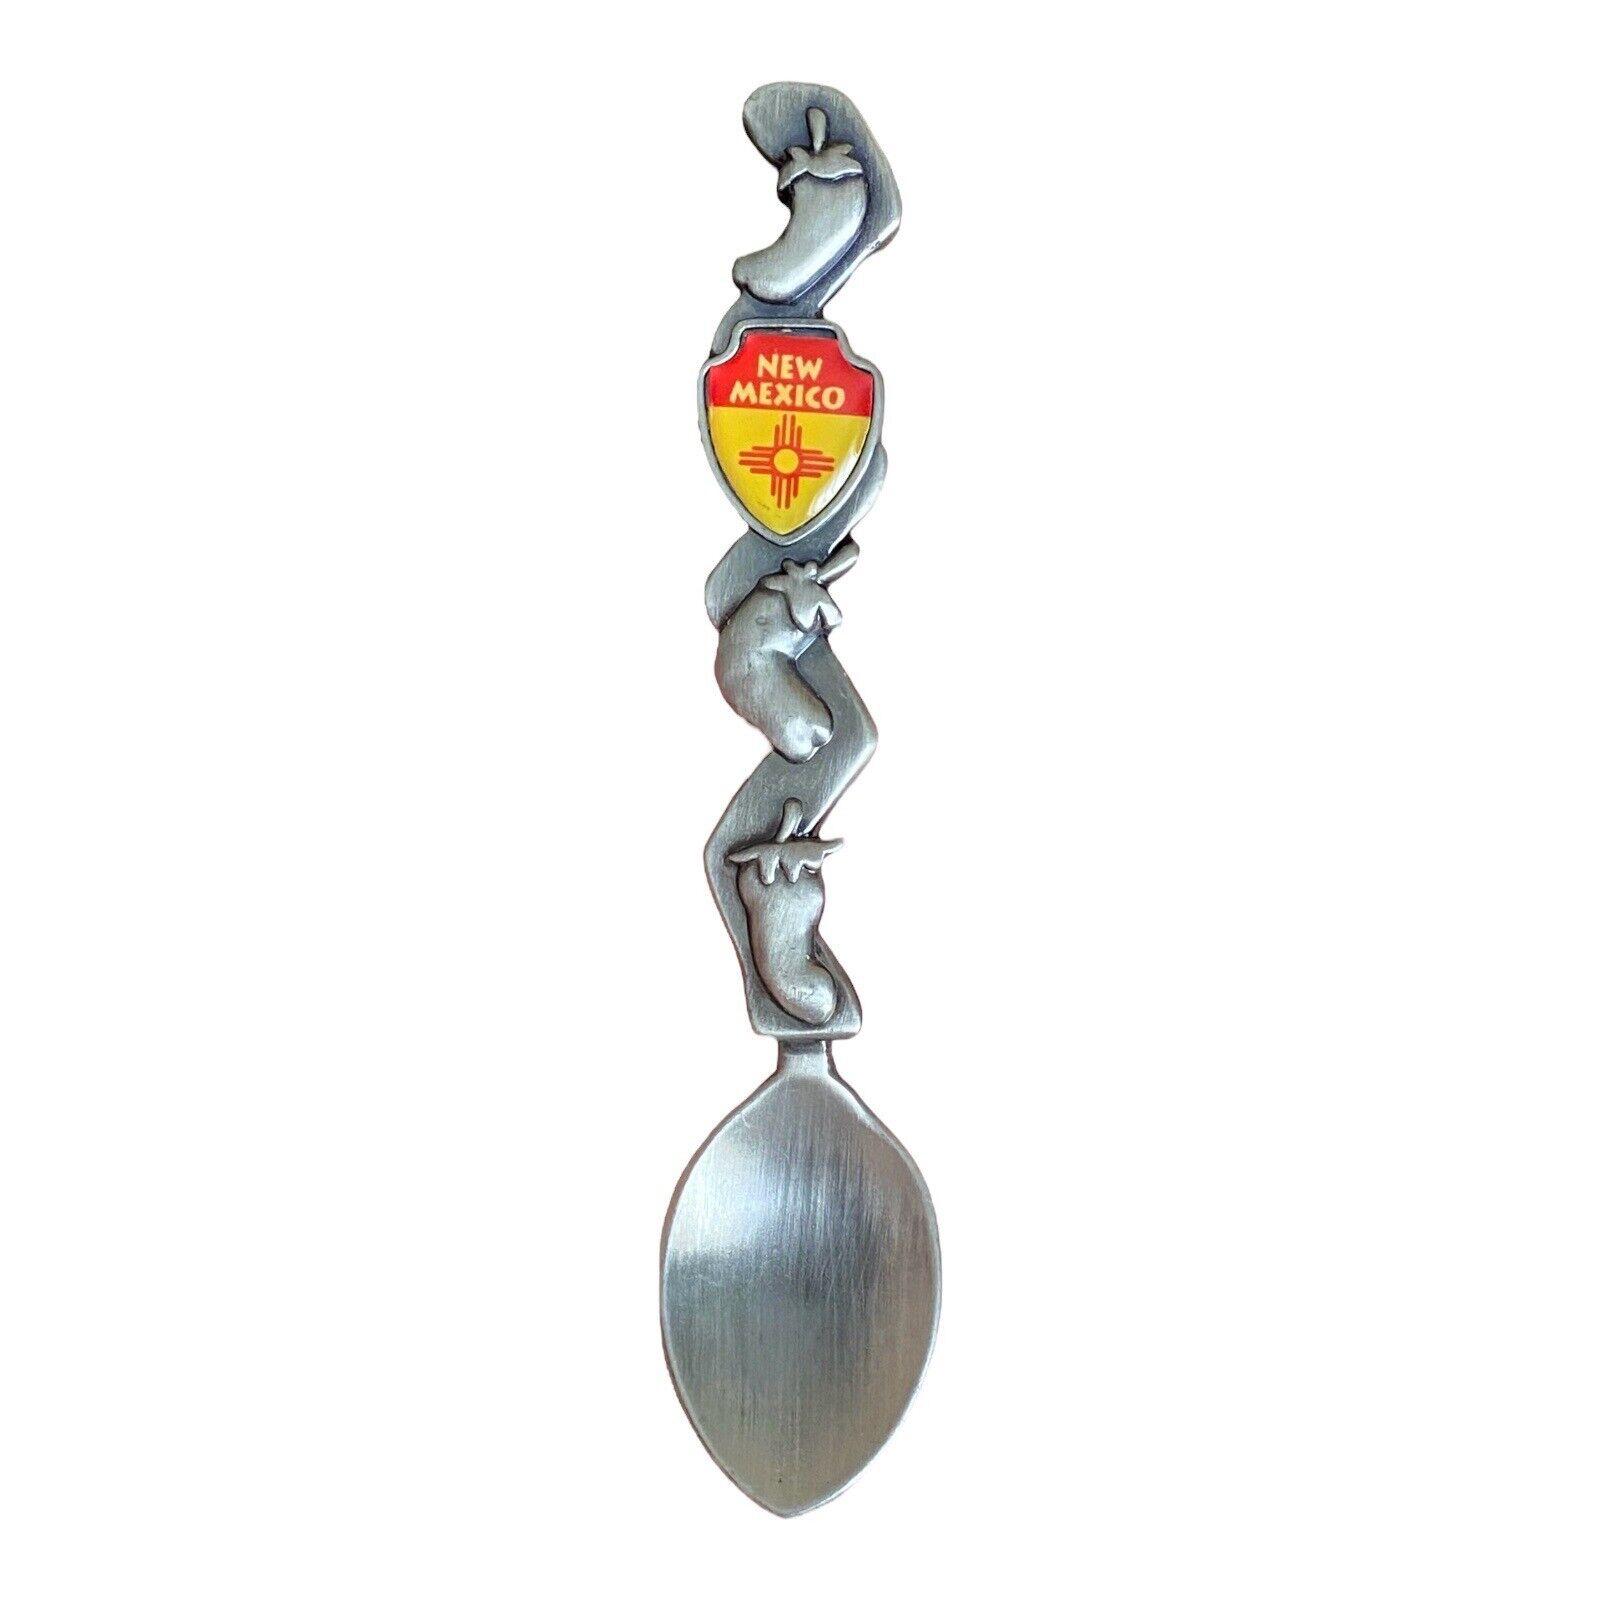 UNIQUE New Mexico Souvenir Spoon with Chili Peppers Jalapeños